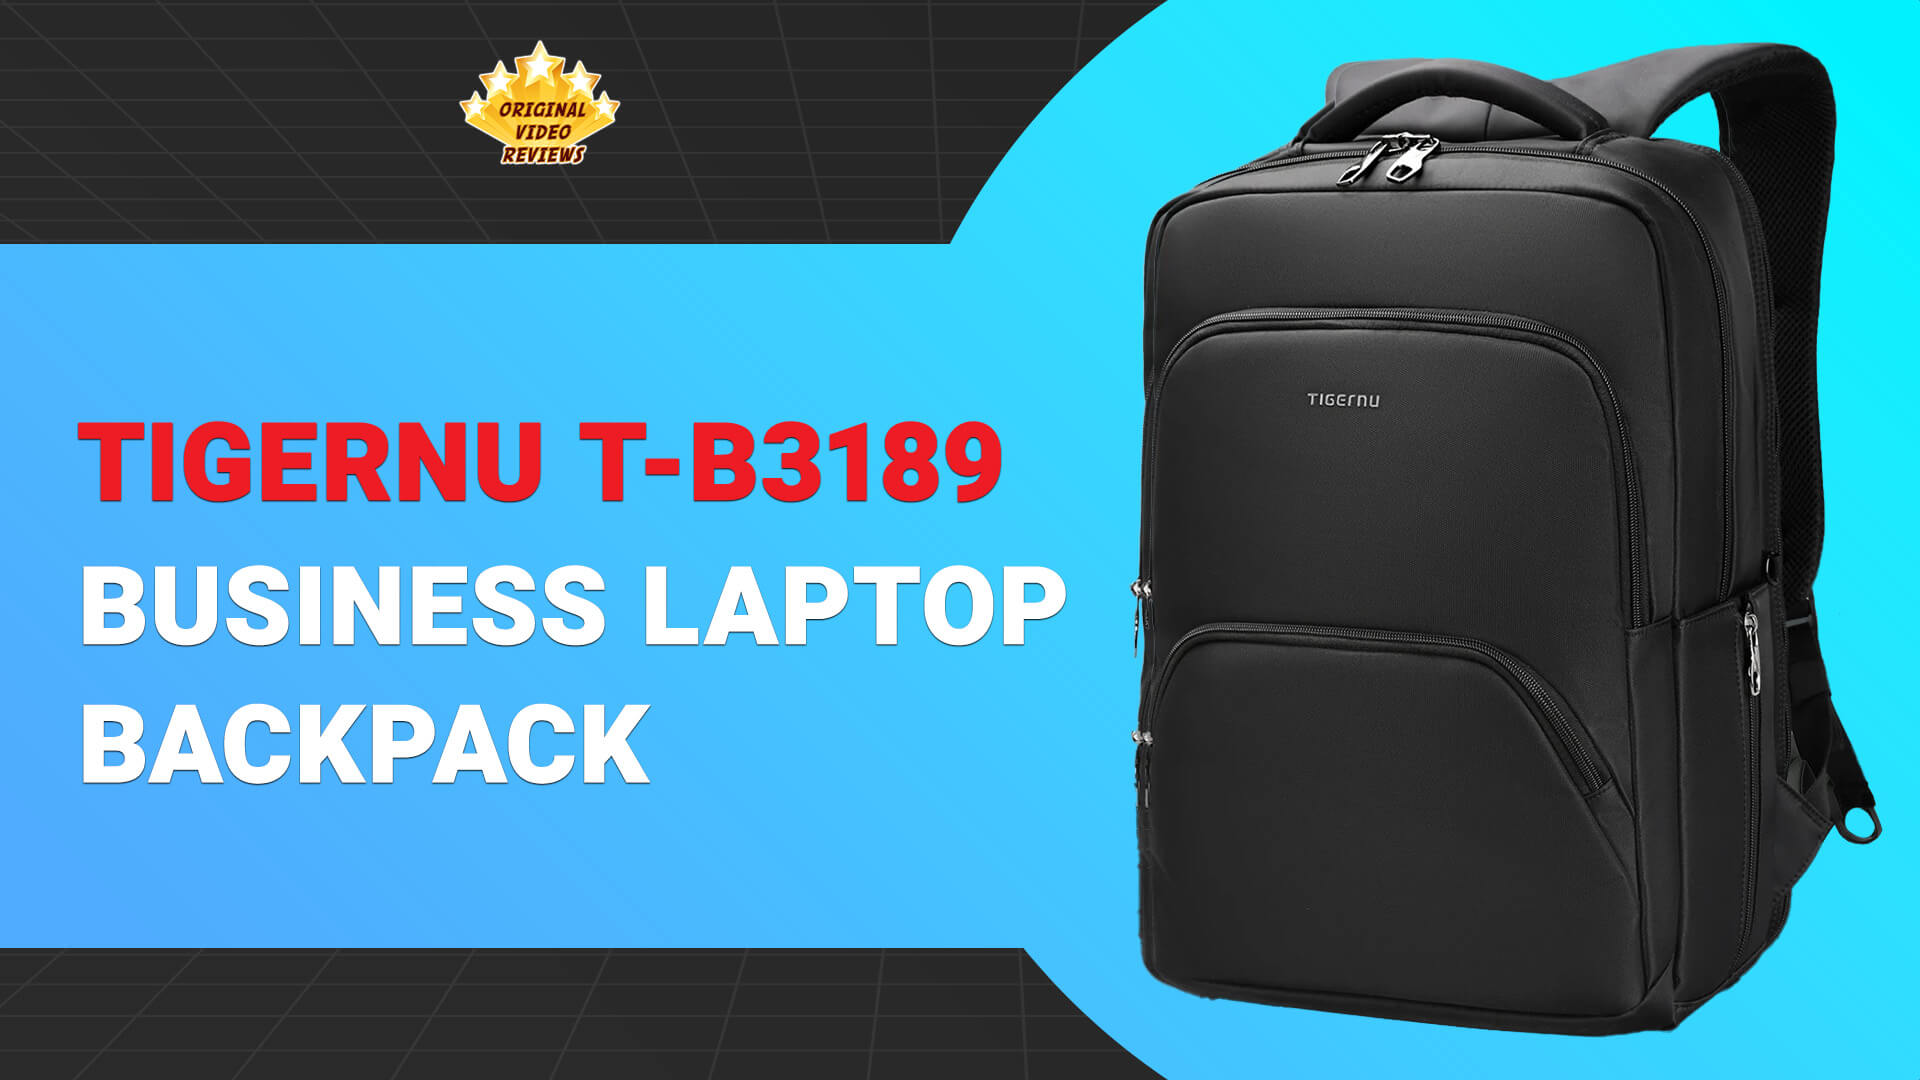 Tigernu T-B3189 Business Laptop Backpack Review